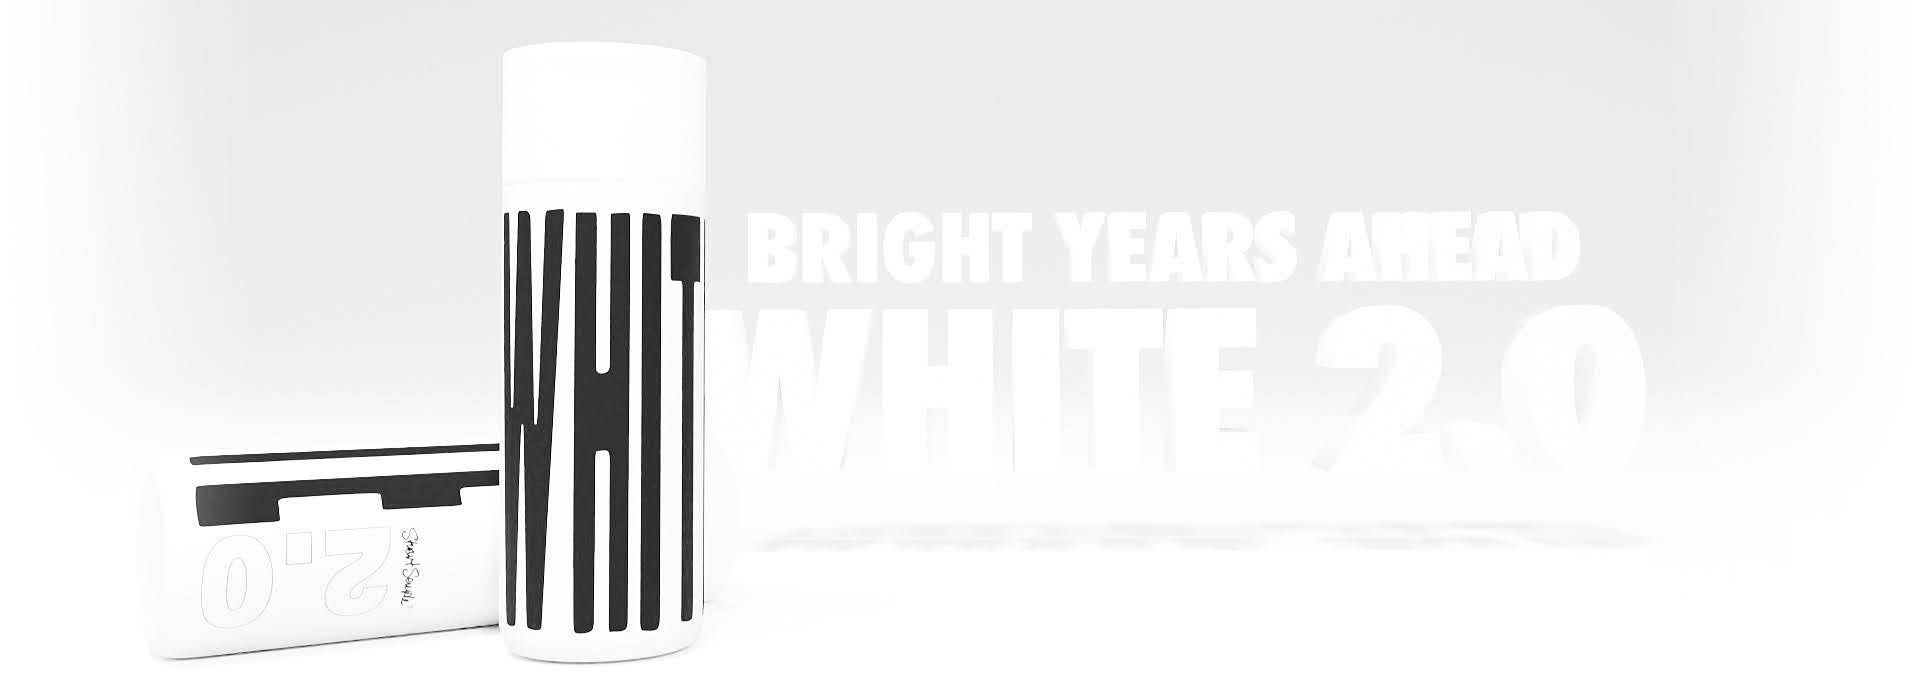 White 2.0 - The World's Brightest White Paint - Acrylic – Culture Hustle